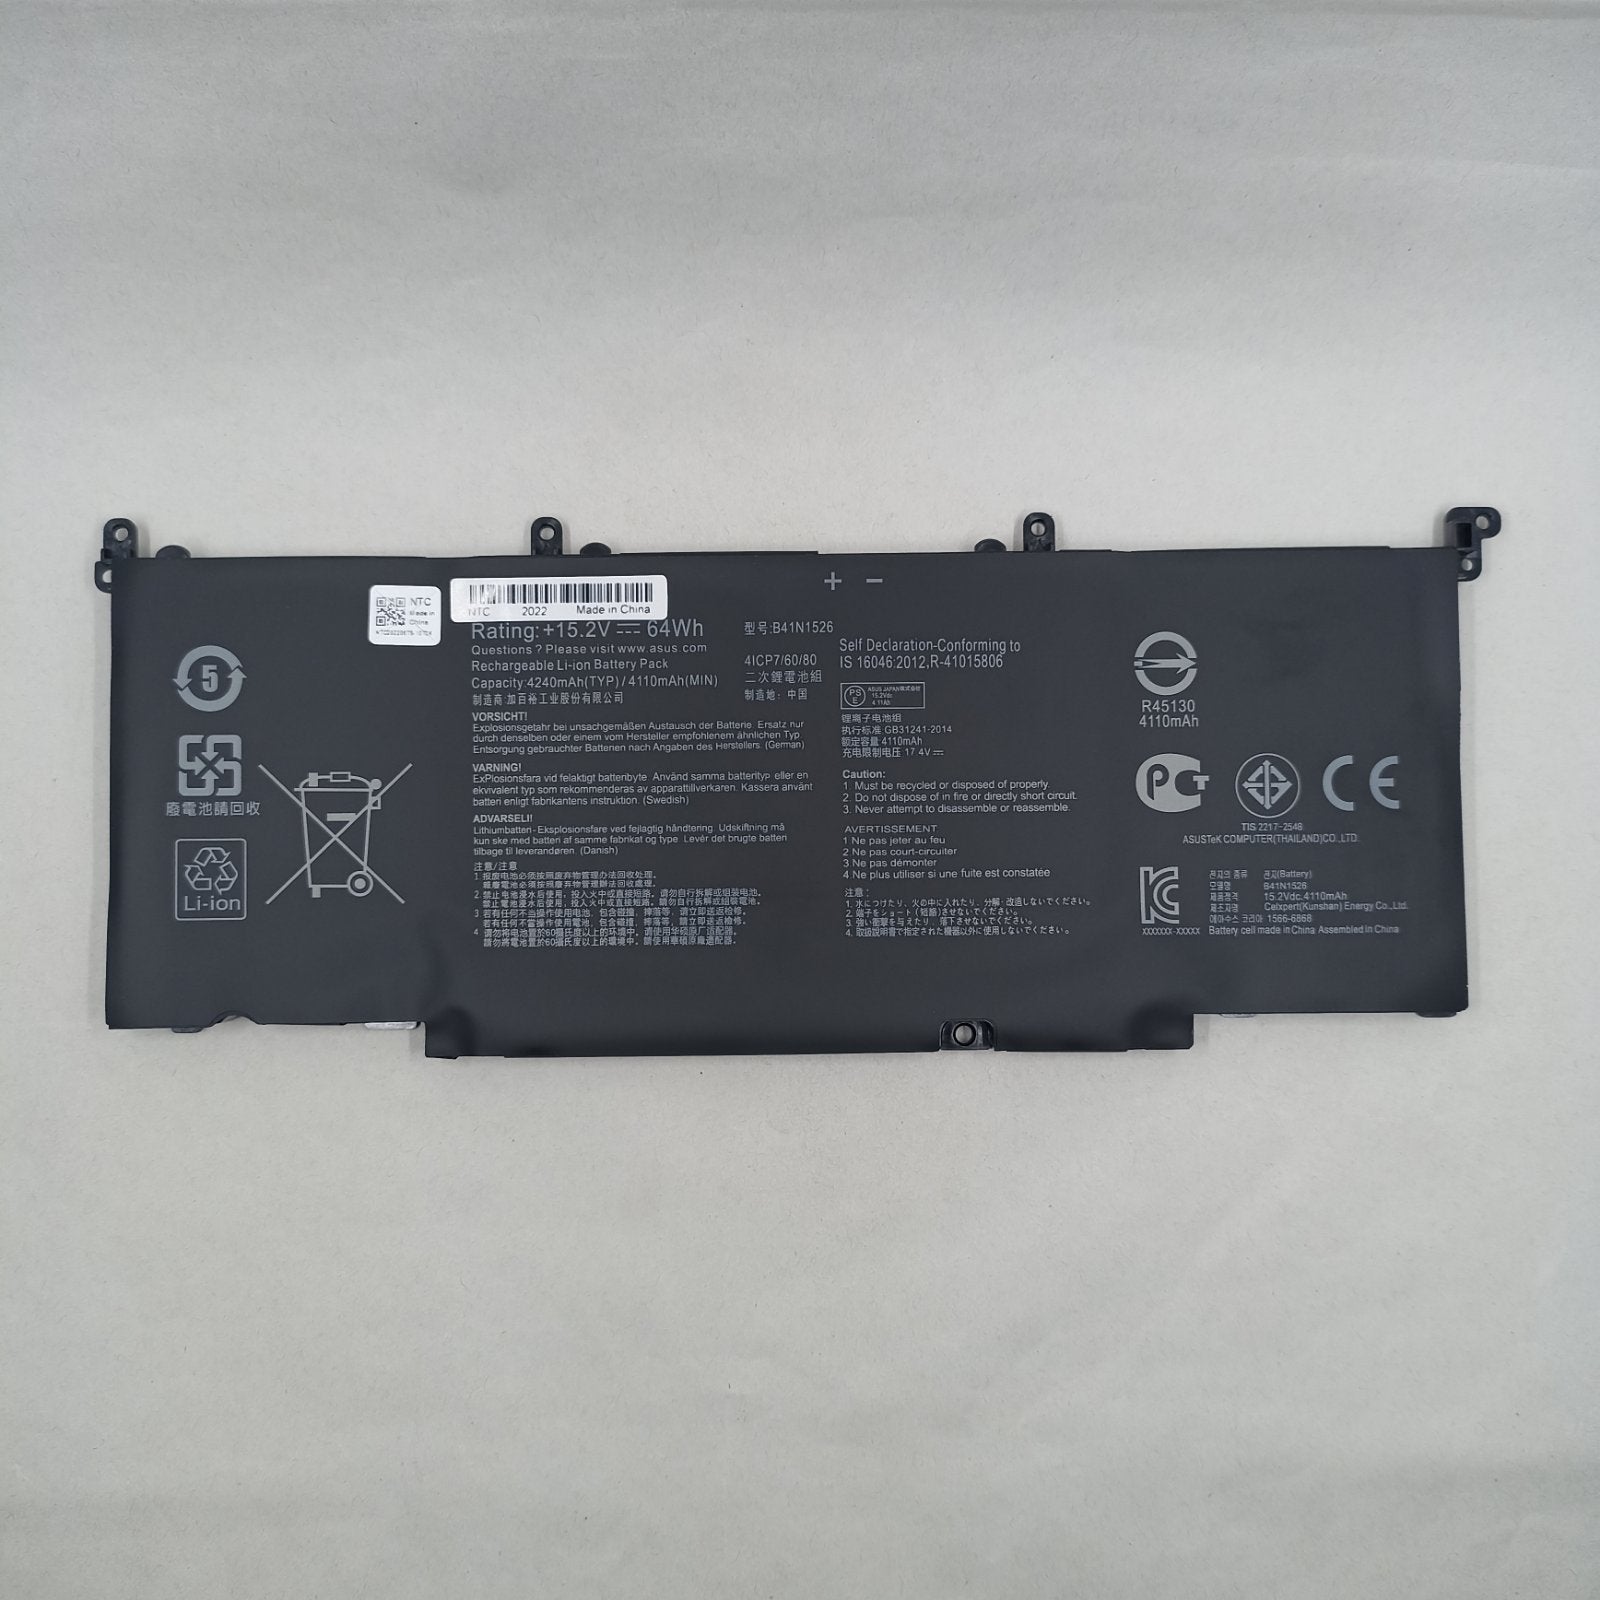 Replacement Battery for Asus FX502VM WL